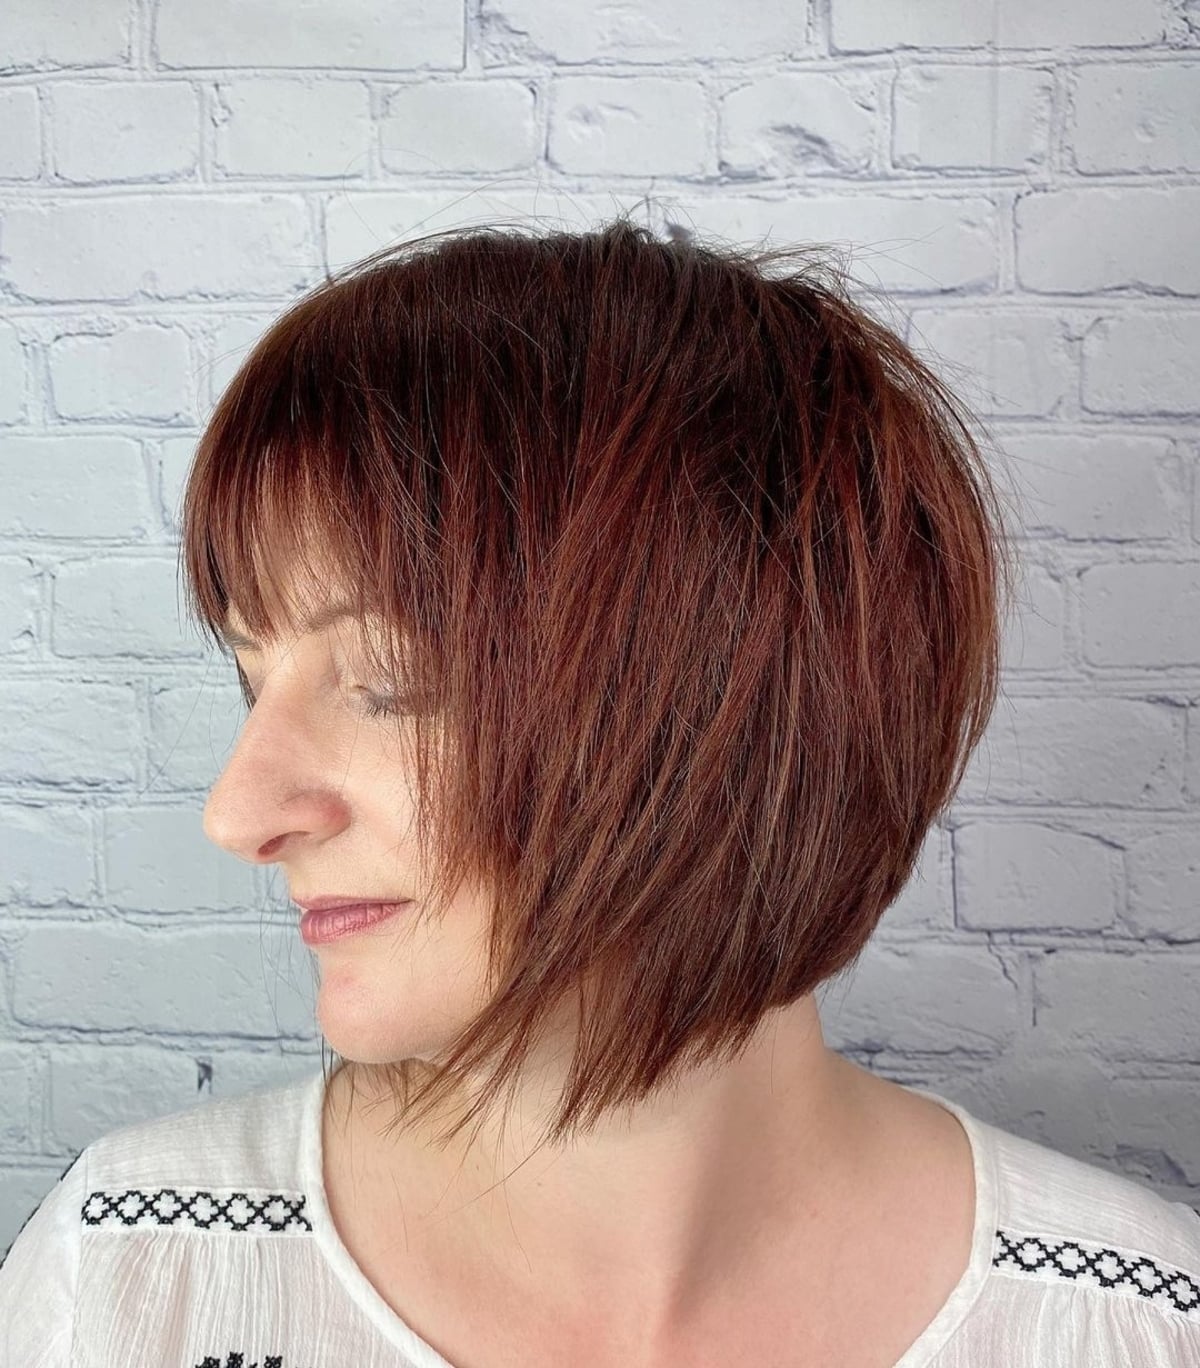 Stacked bob with choppy ends and bangs